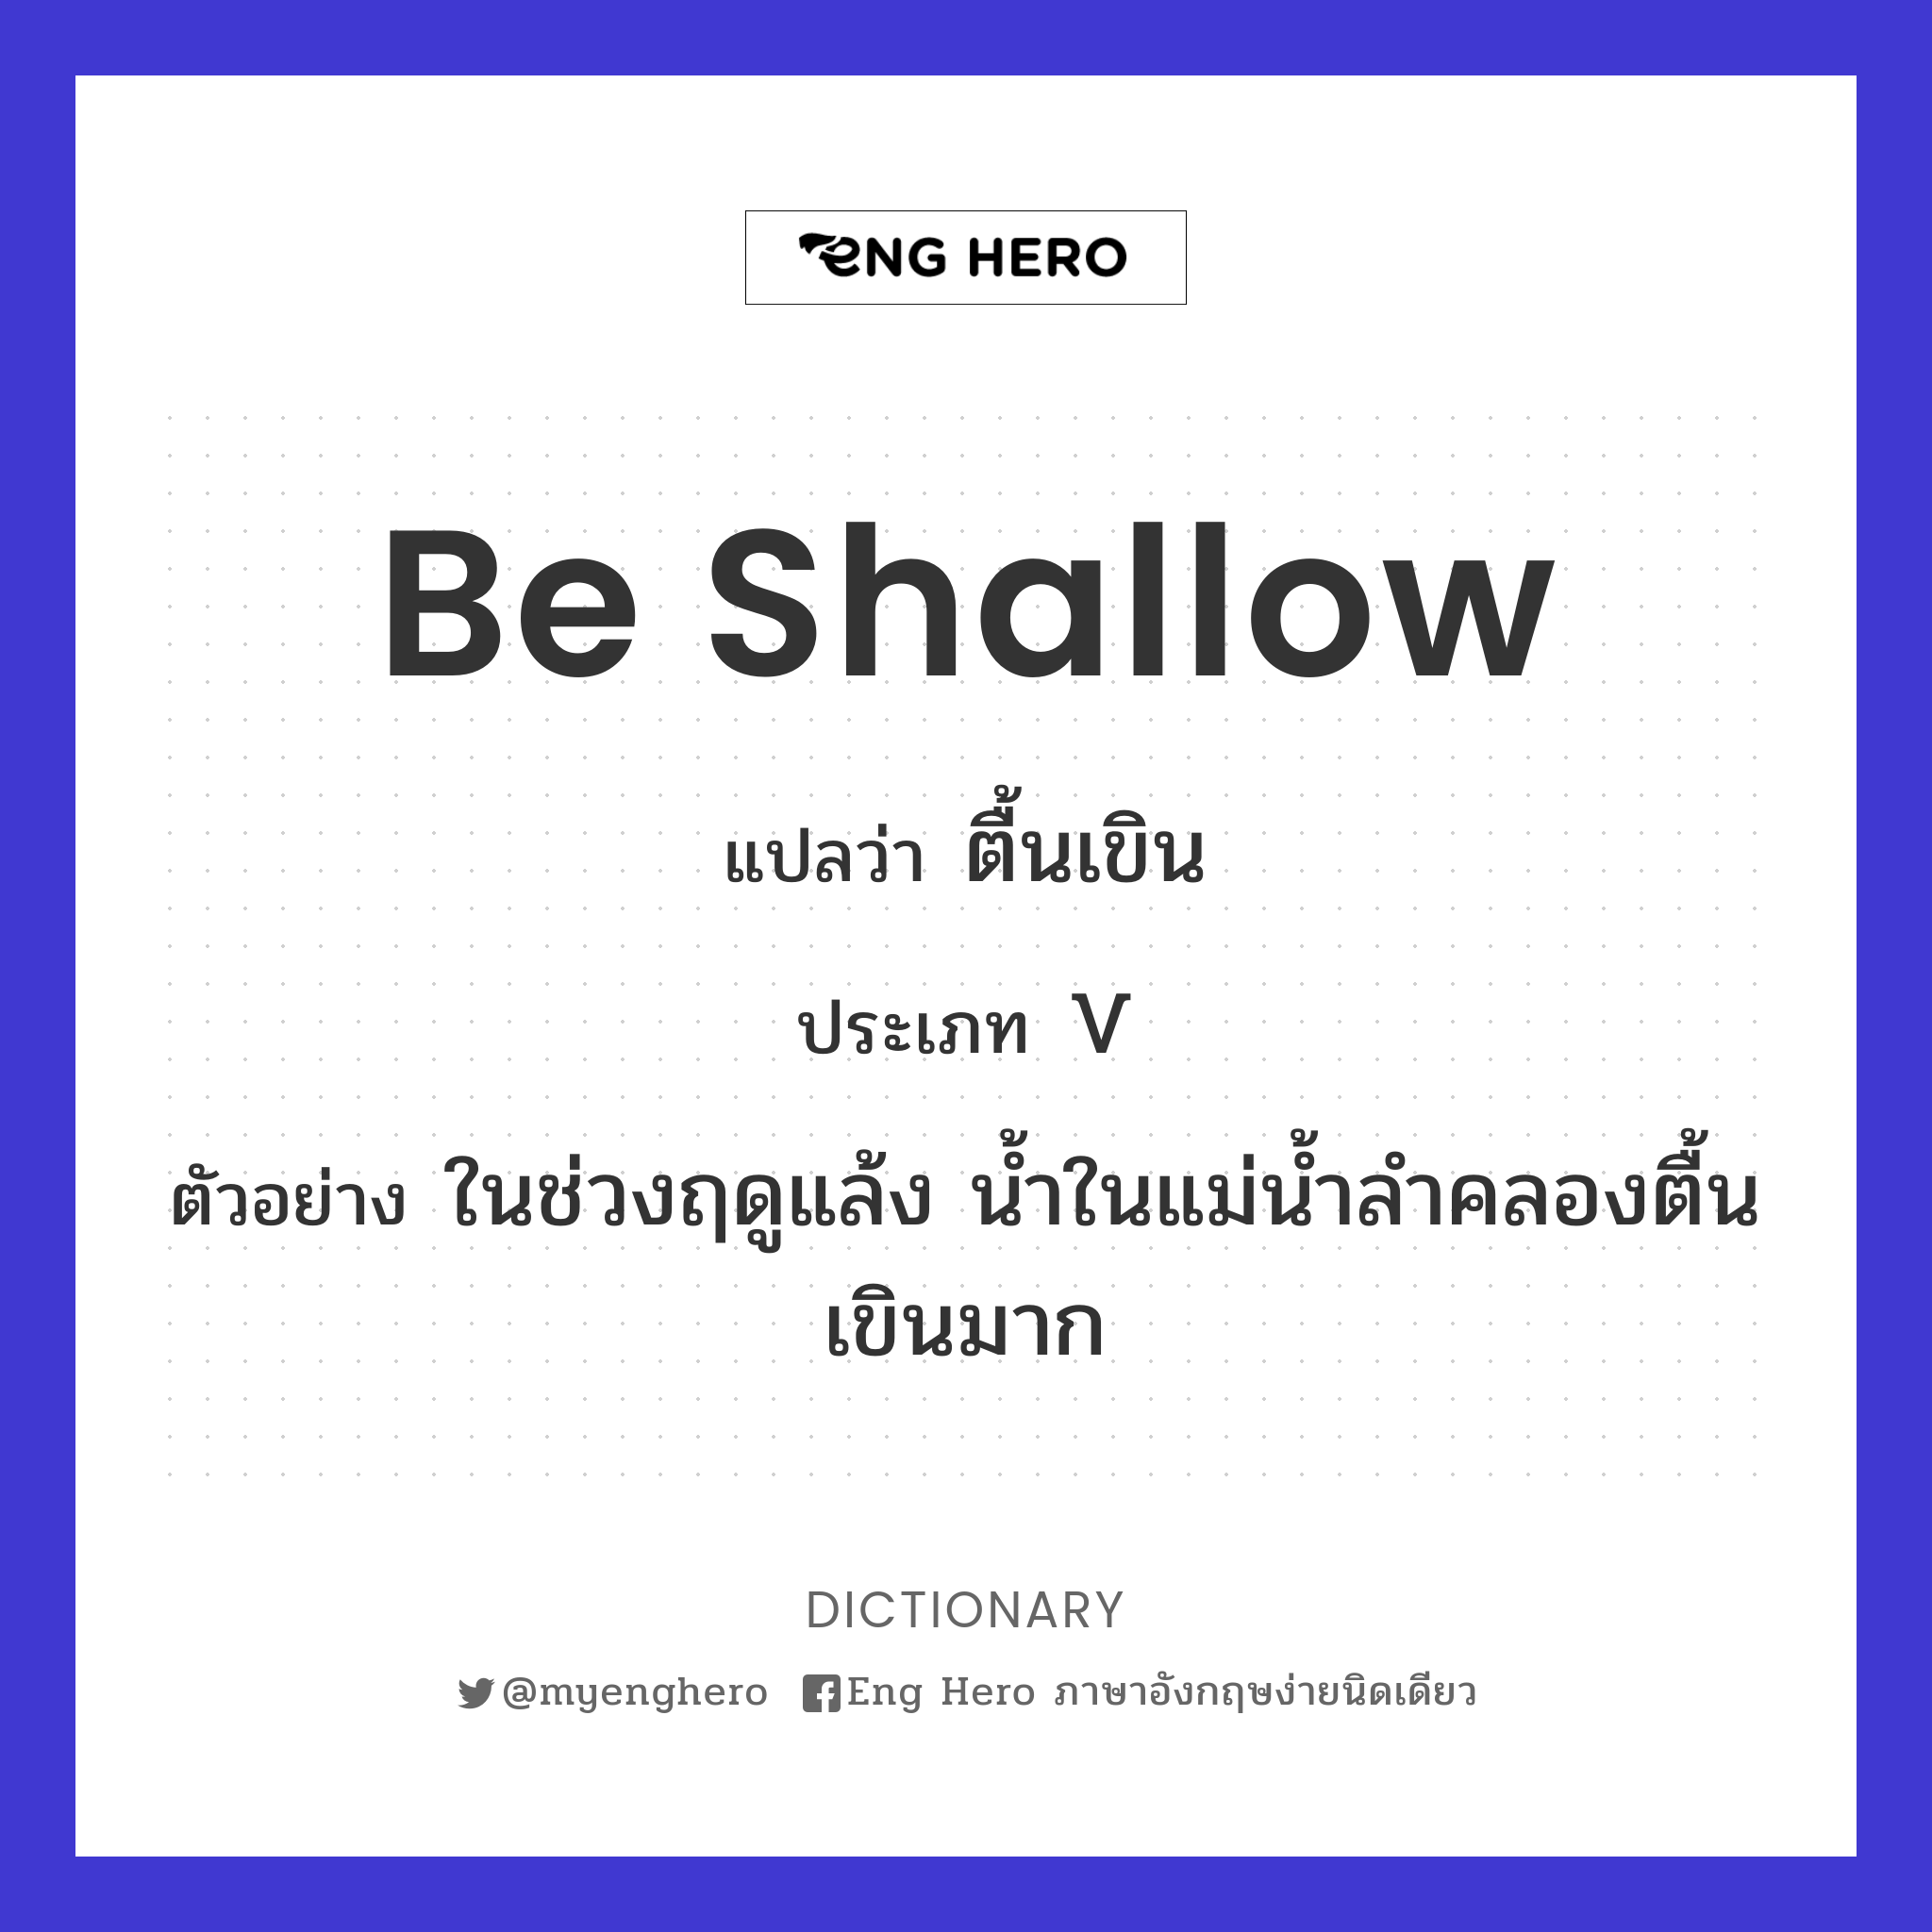 be shallow